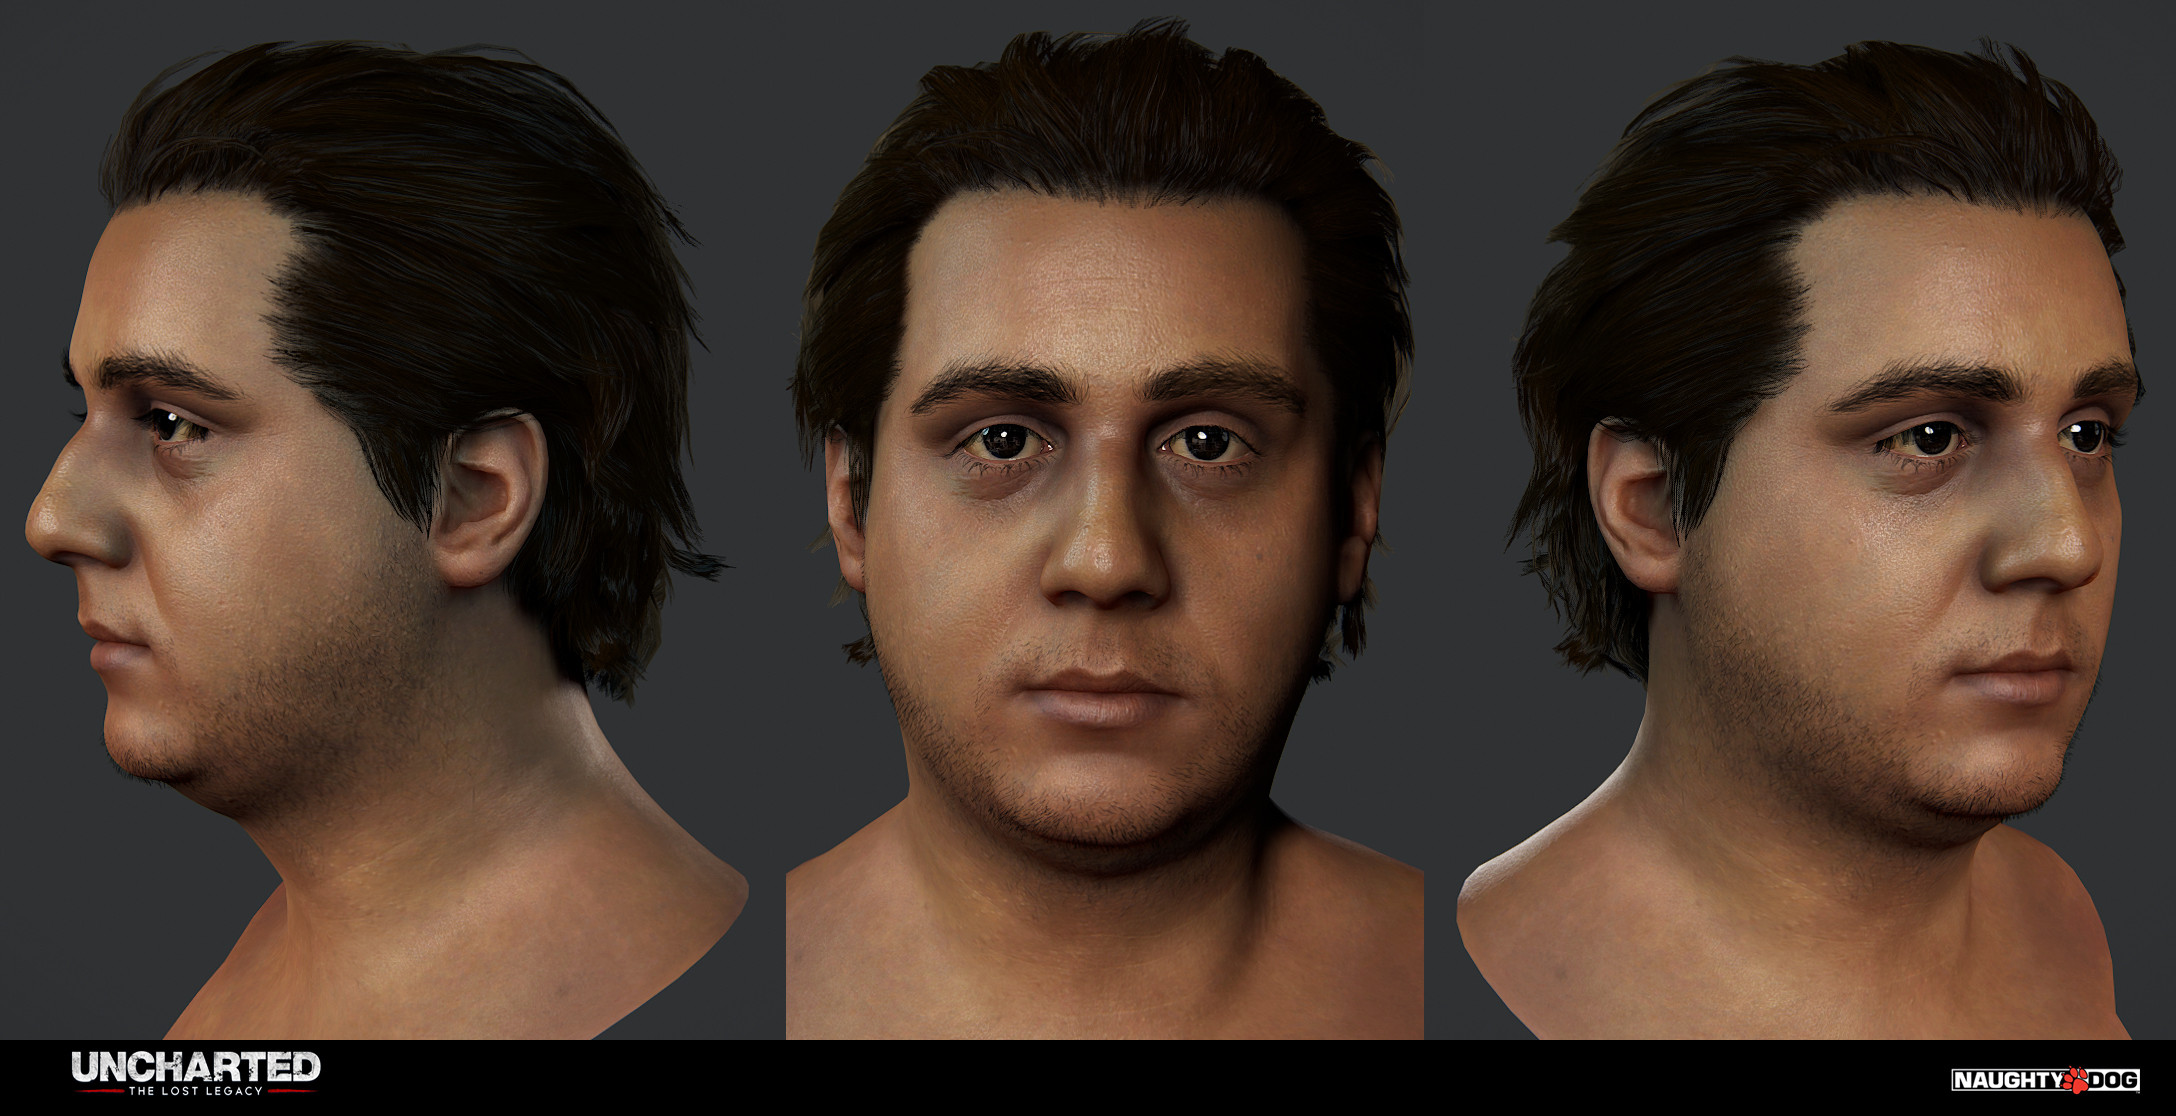 Npc head: head started from scan data.  Hair started from an existent archive and reworked for this character.